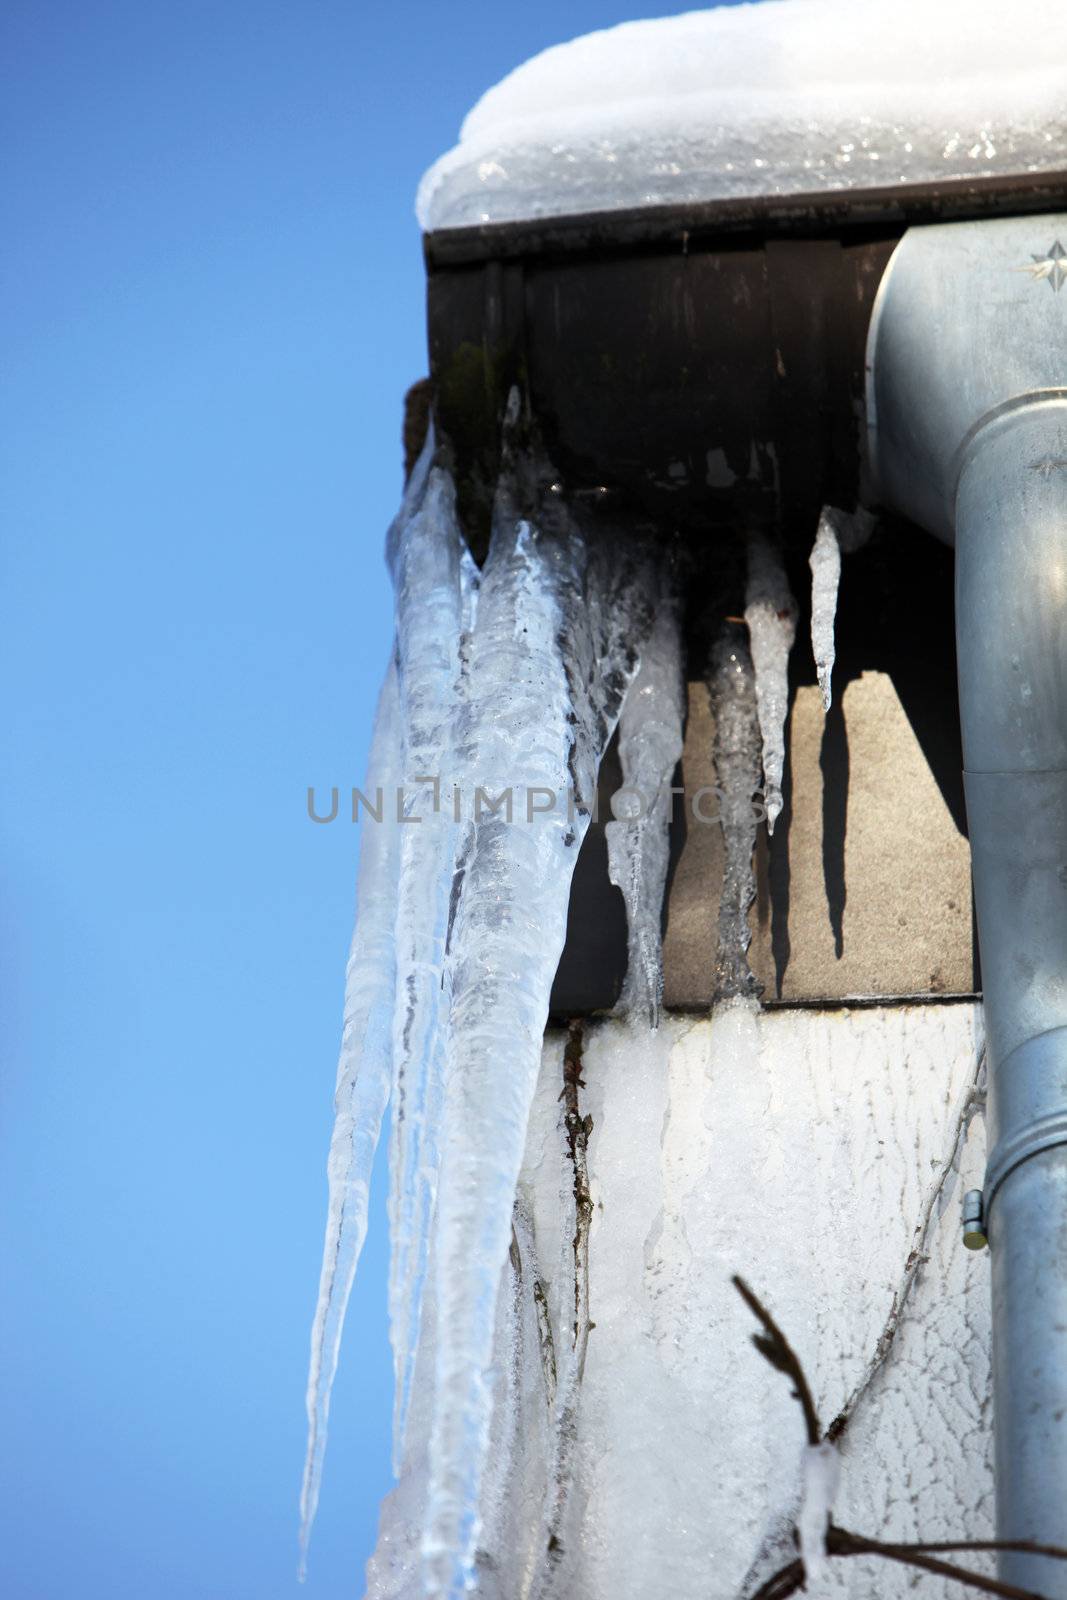 dangerous, large icicles hanging from the gutter in front of blue sky